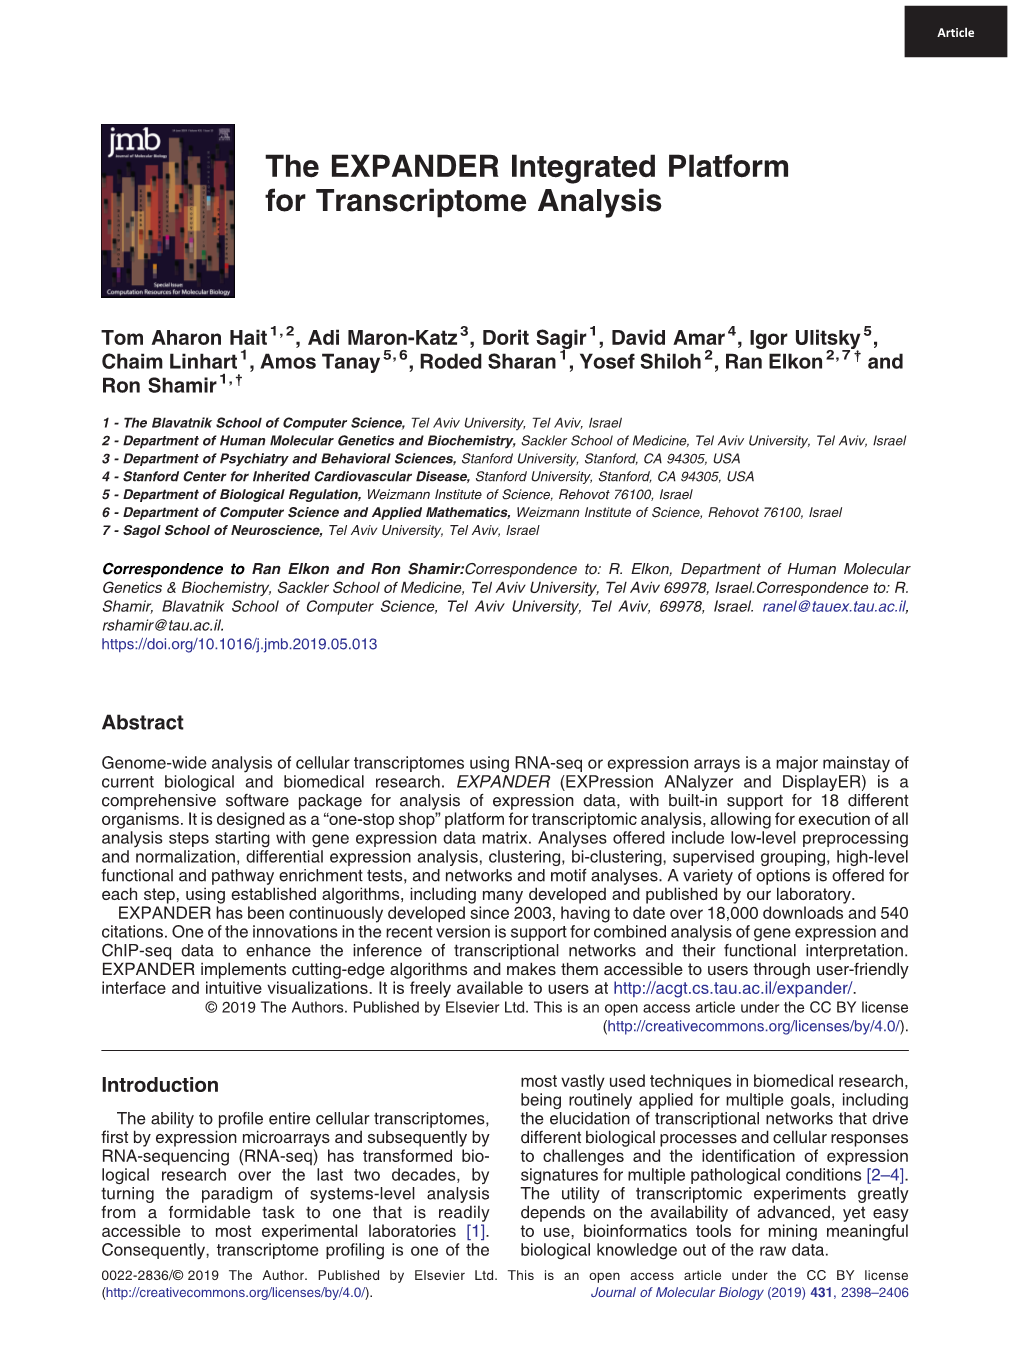 The EXPANDER Integrated Platform for Transcriptome Analysis